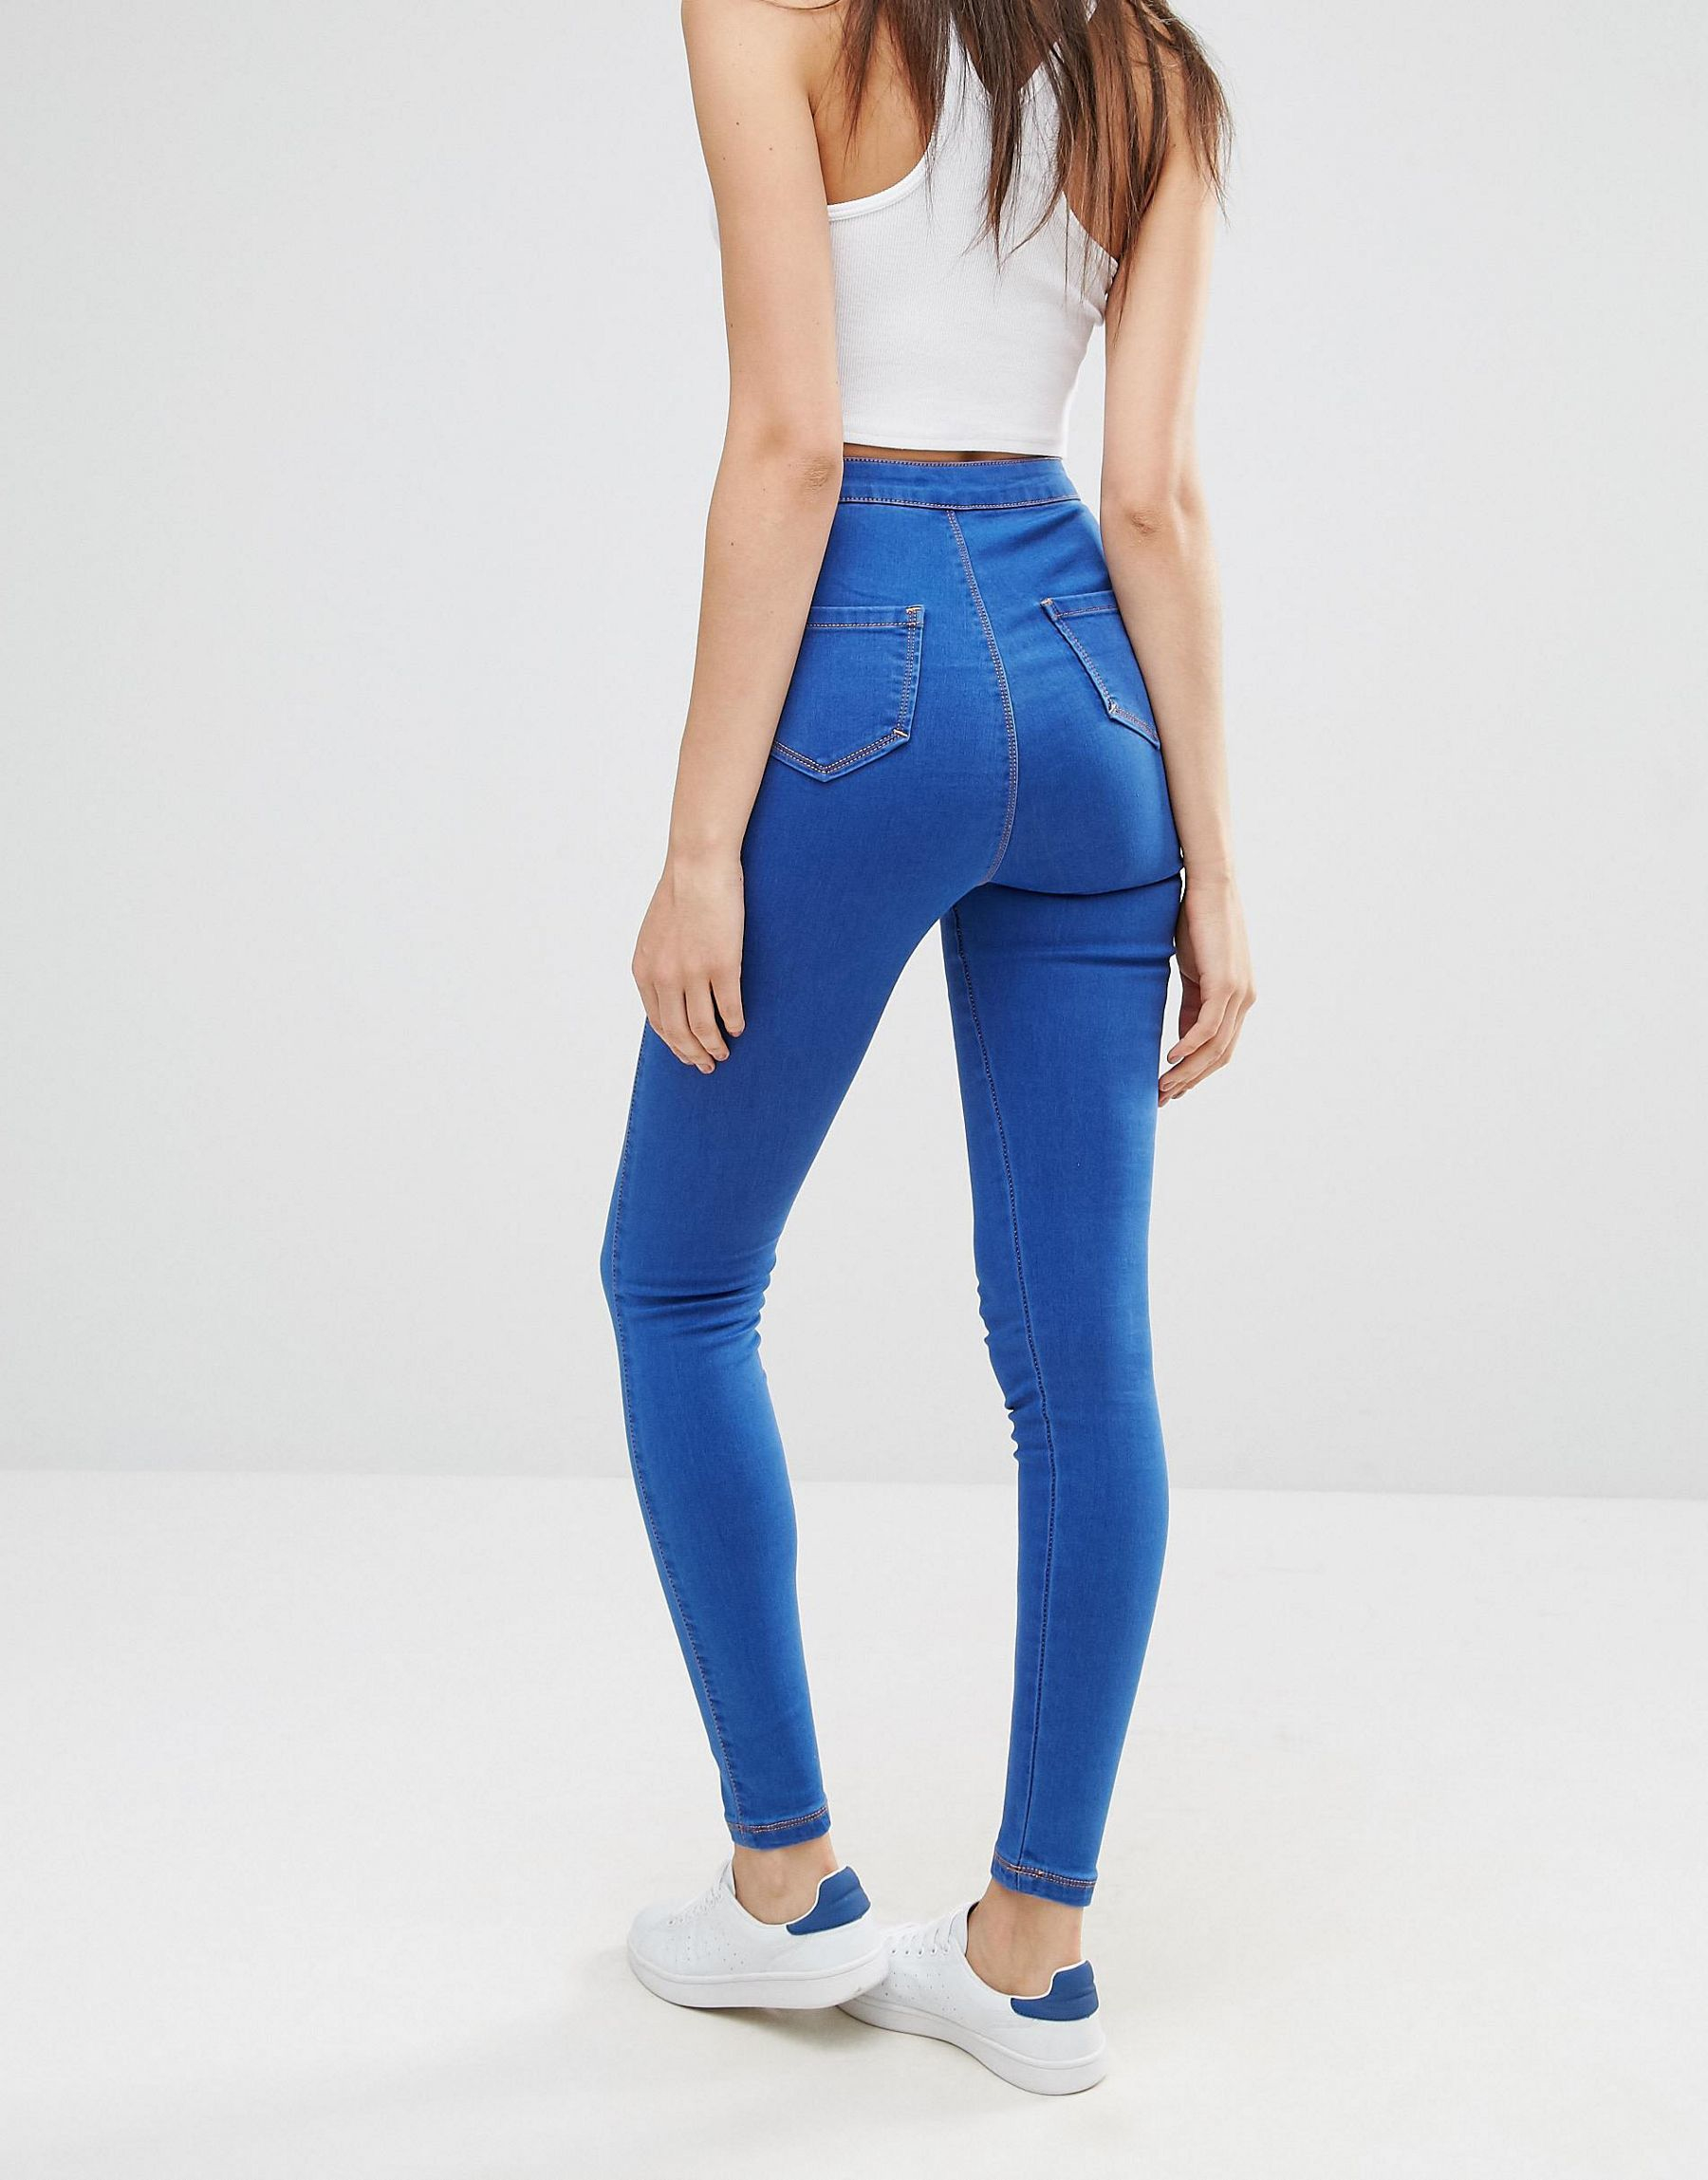 Missguided Vice High Waisted Tube Jean in Blue | Lyst